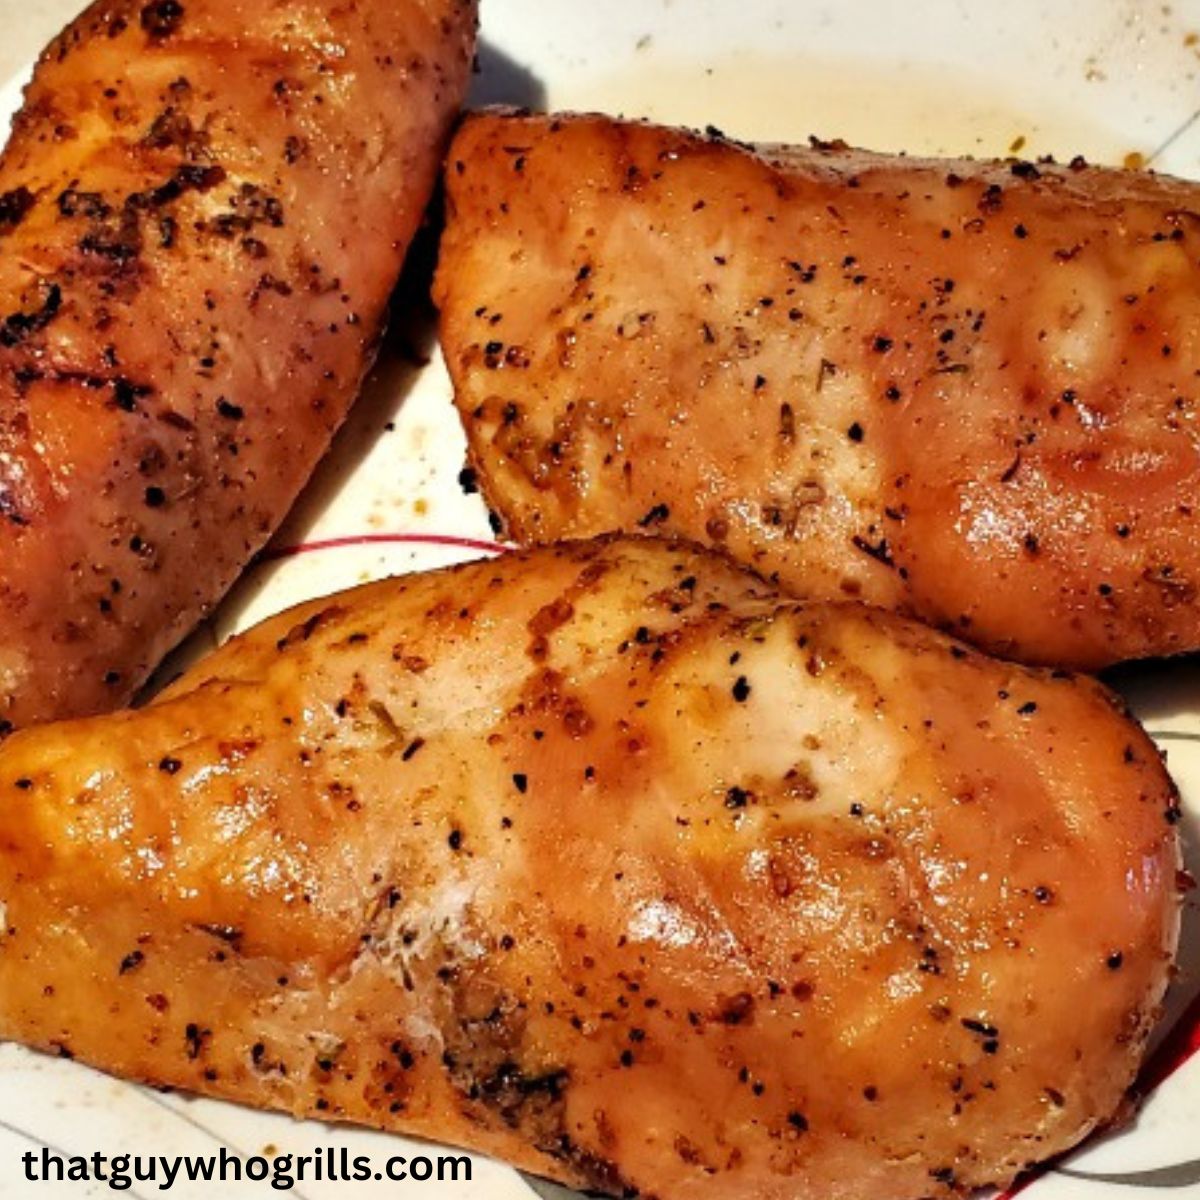 Smoked Chicken Breasts On Plate